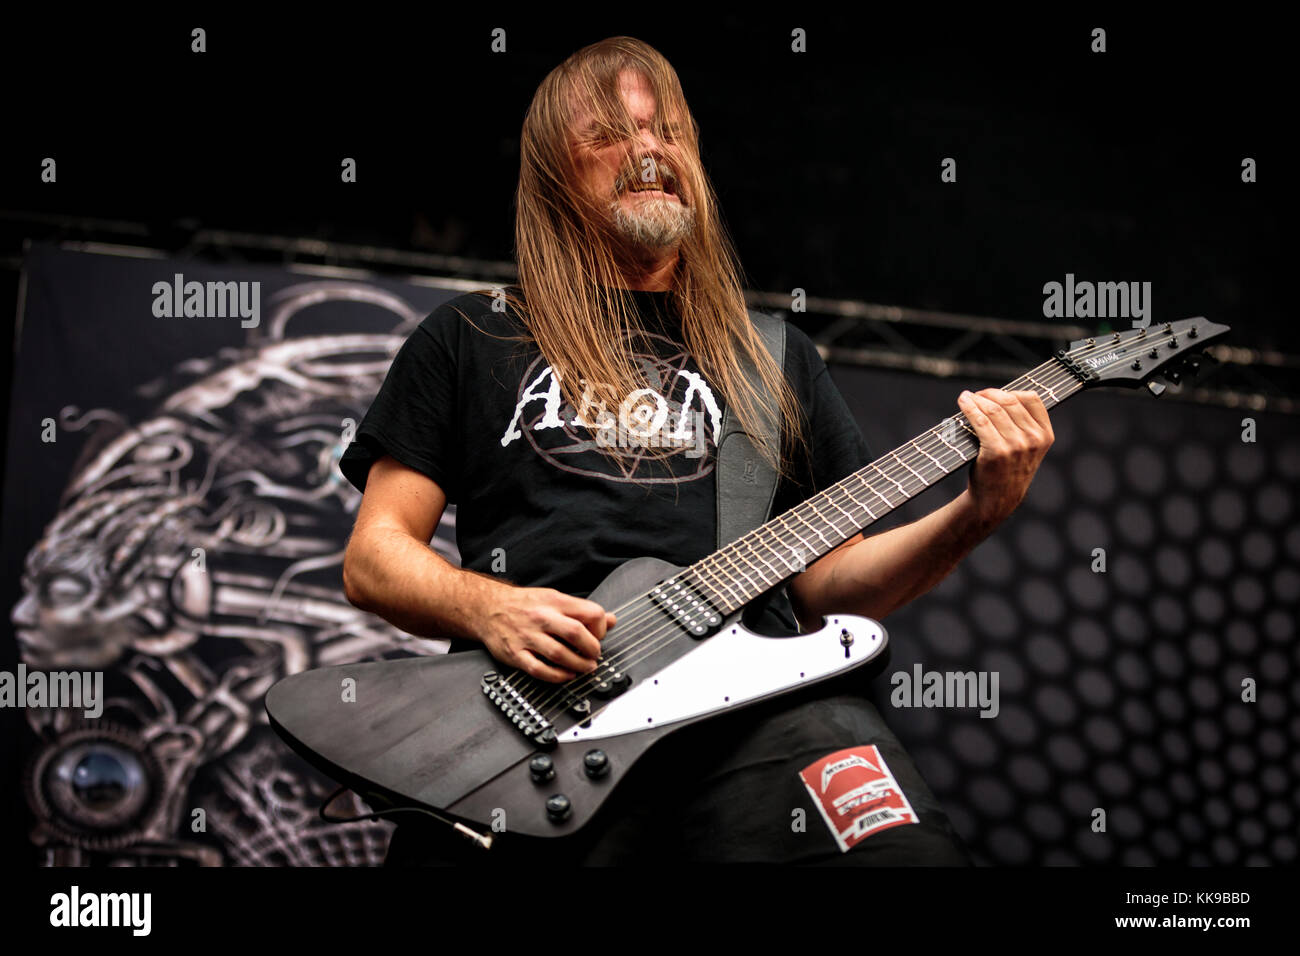 The Swedish extreme metal band Meshuggah performs a live concert at  Bergenhus Festning in Bergen. Here musician and guitarist Fredrik  Thordendal is pictured live on stage. Norway, 20/08 2015 Stock Photo - Alamy